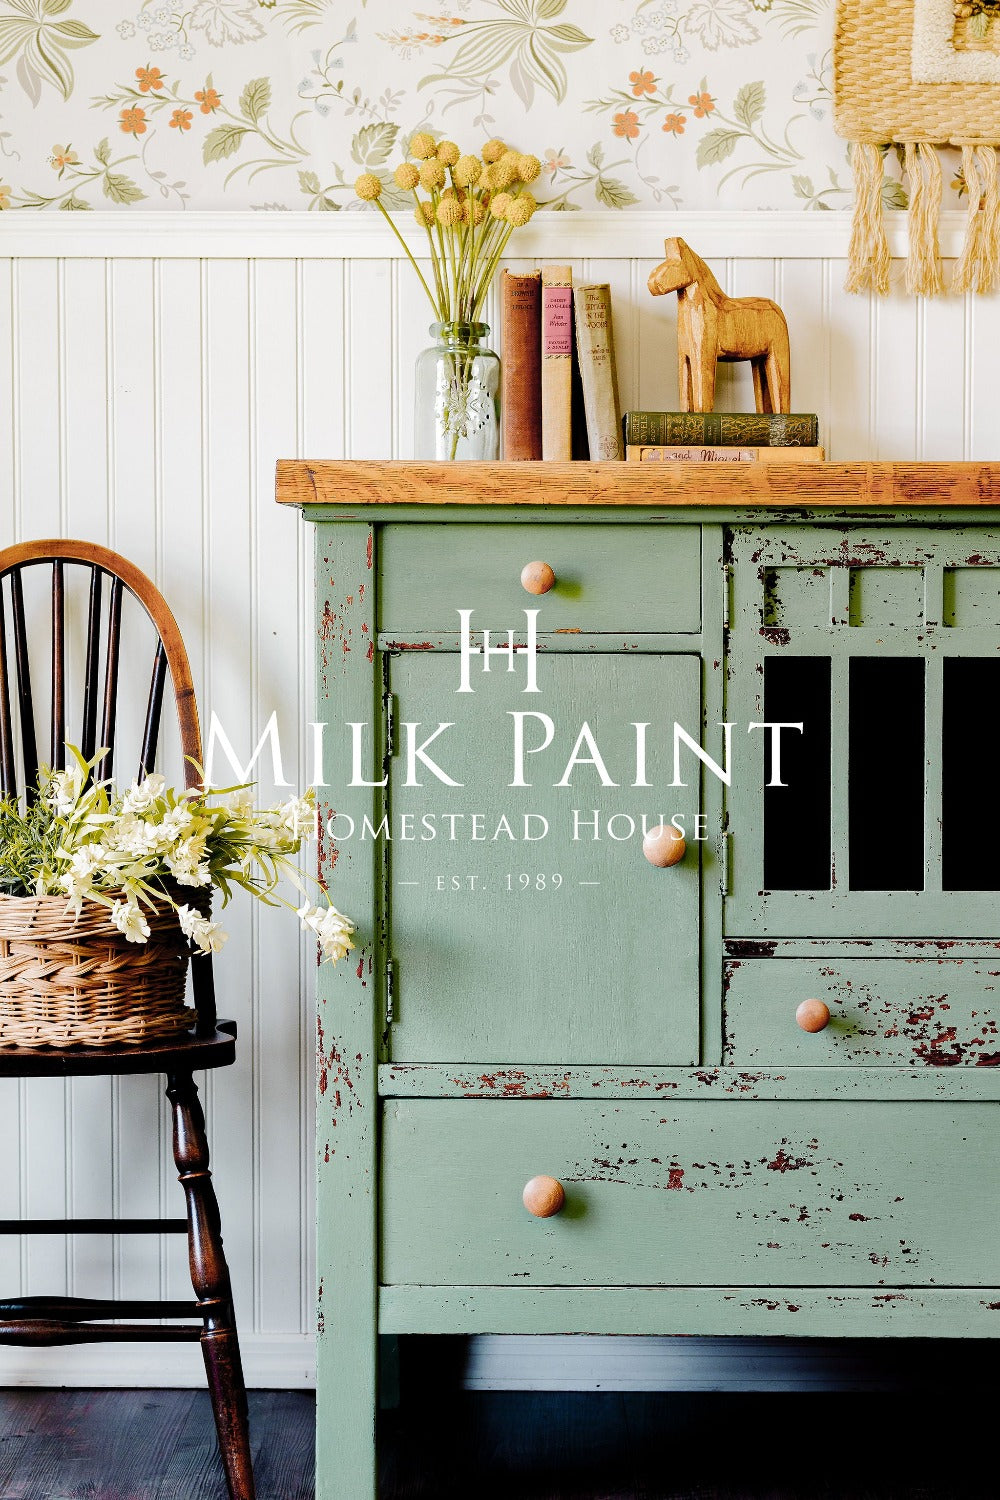 STOCKHOLM GREEN Milk Paint Homestead House 50g and 300g